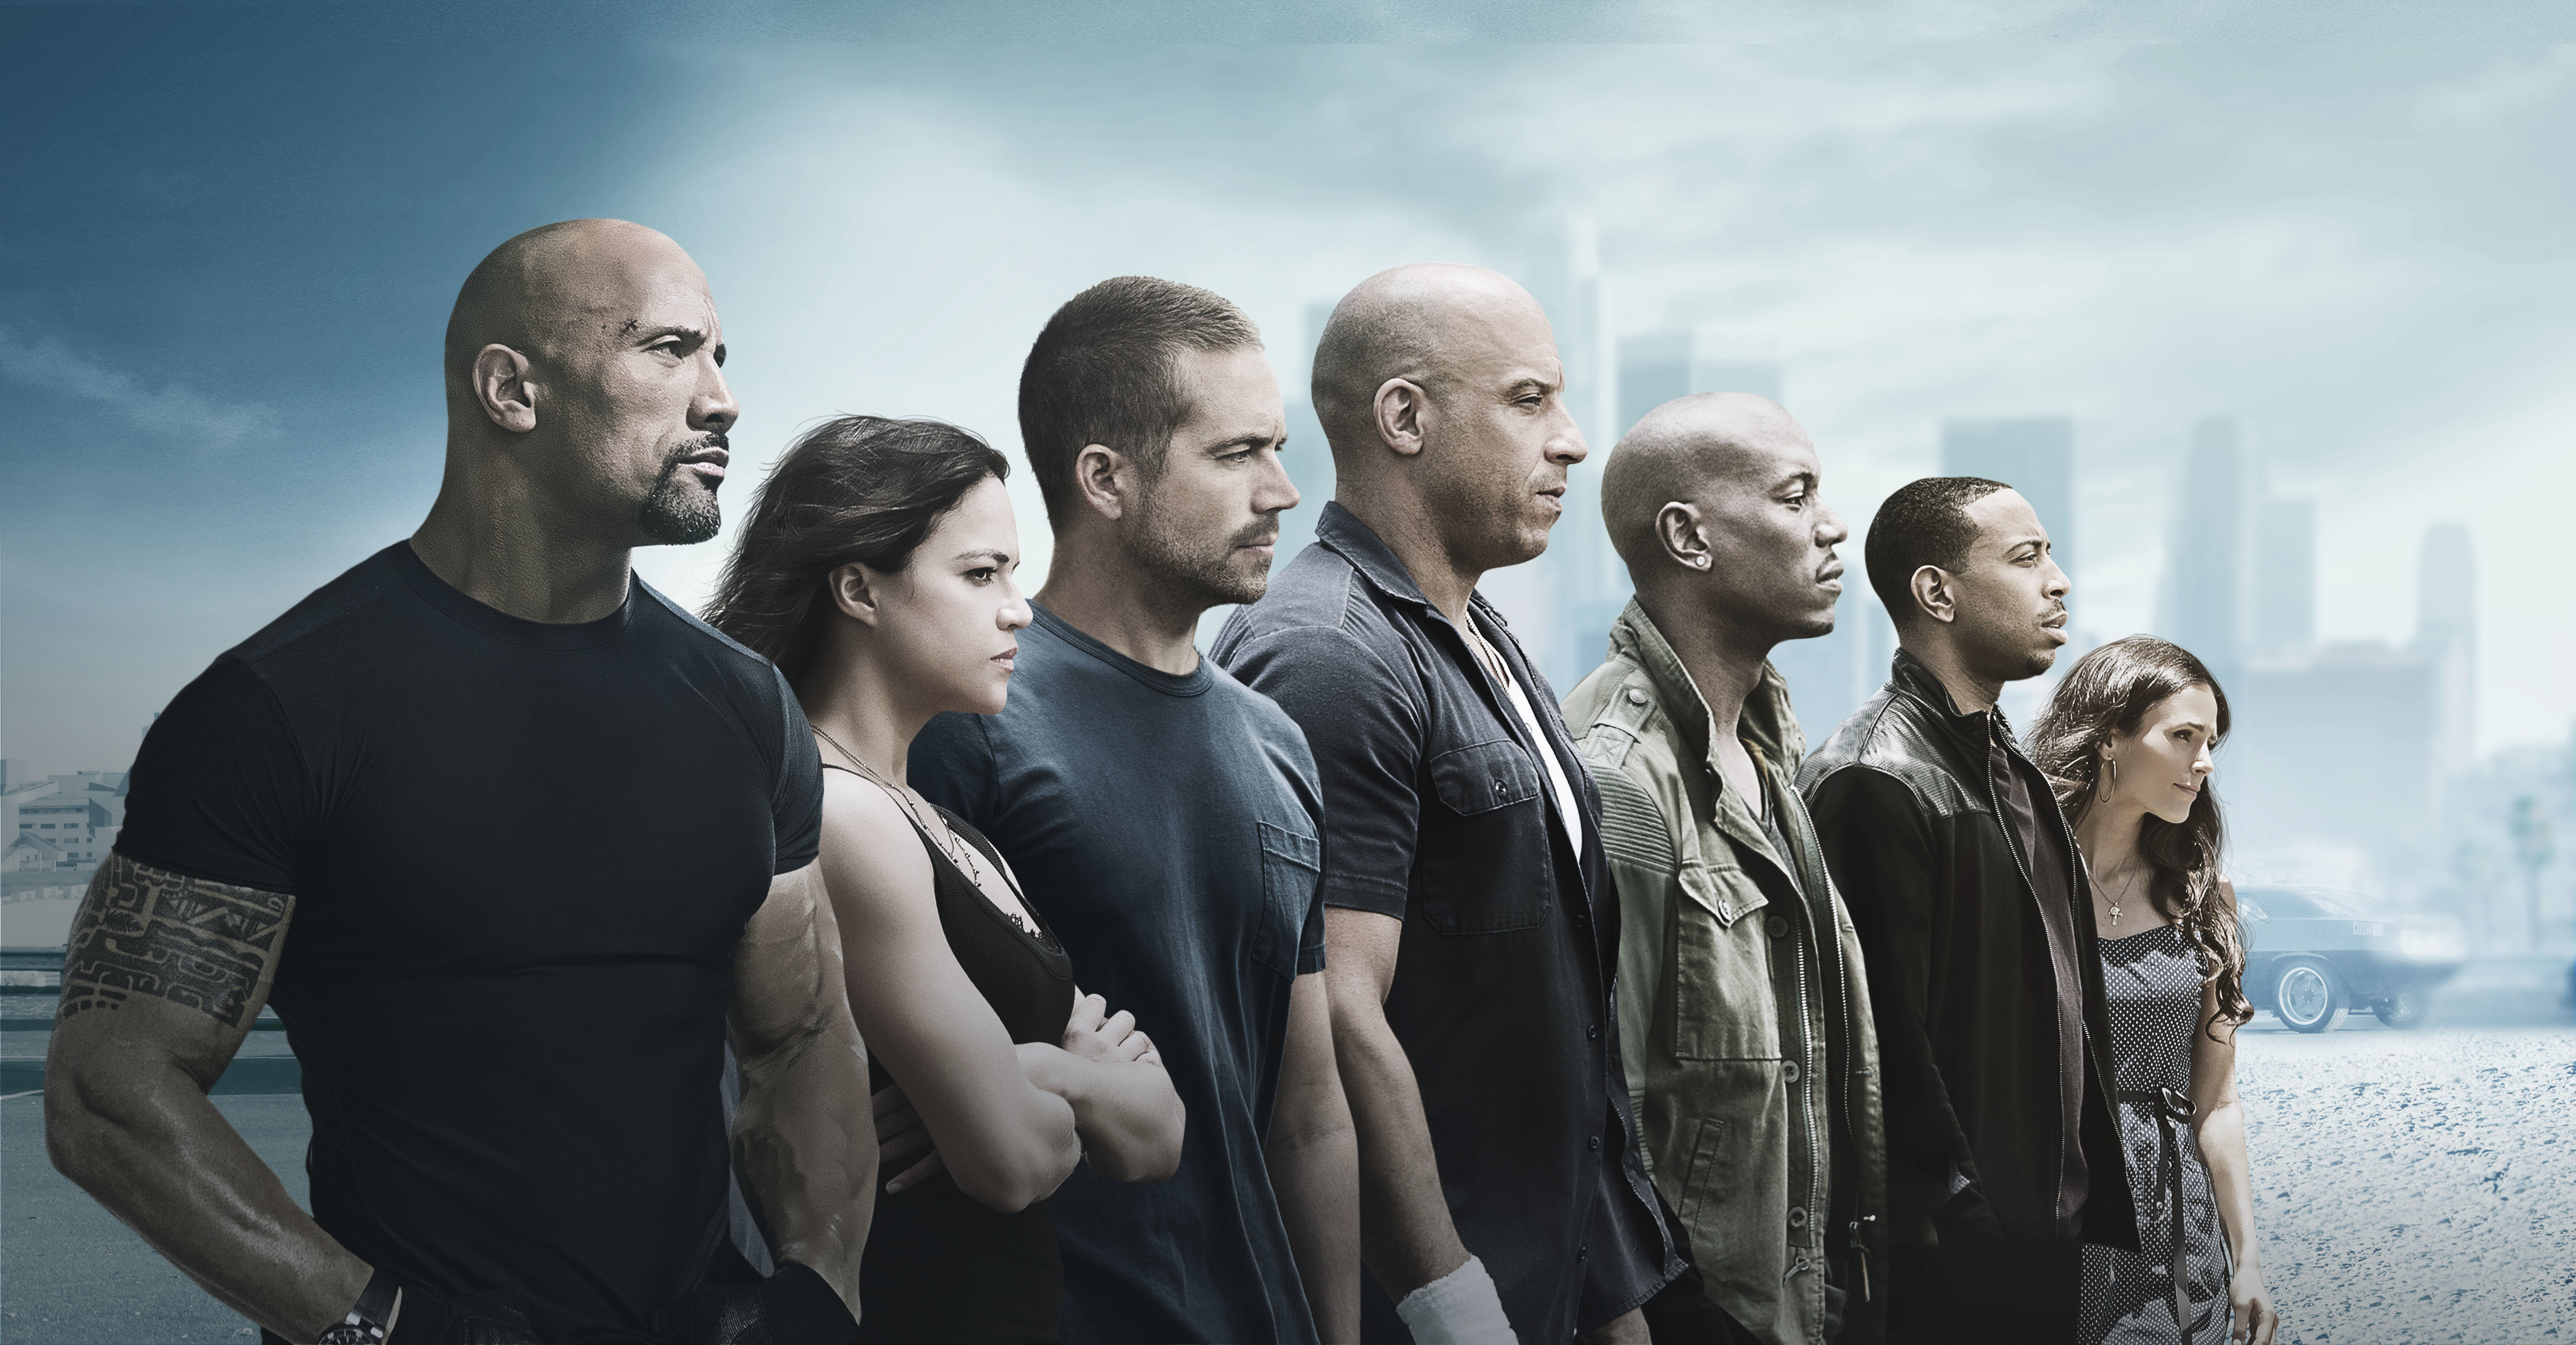 Wallpaper Furious 7, Fast and the Furious, HD, 4K, Movies, #2157